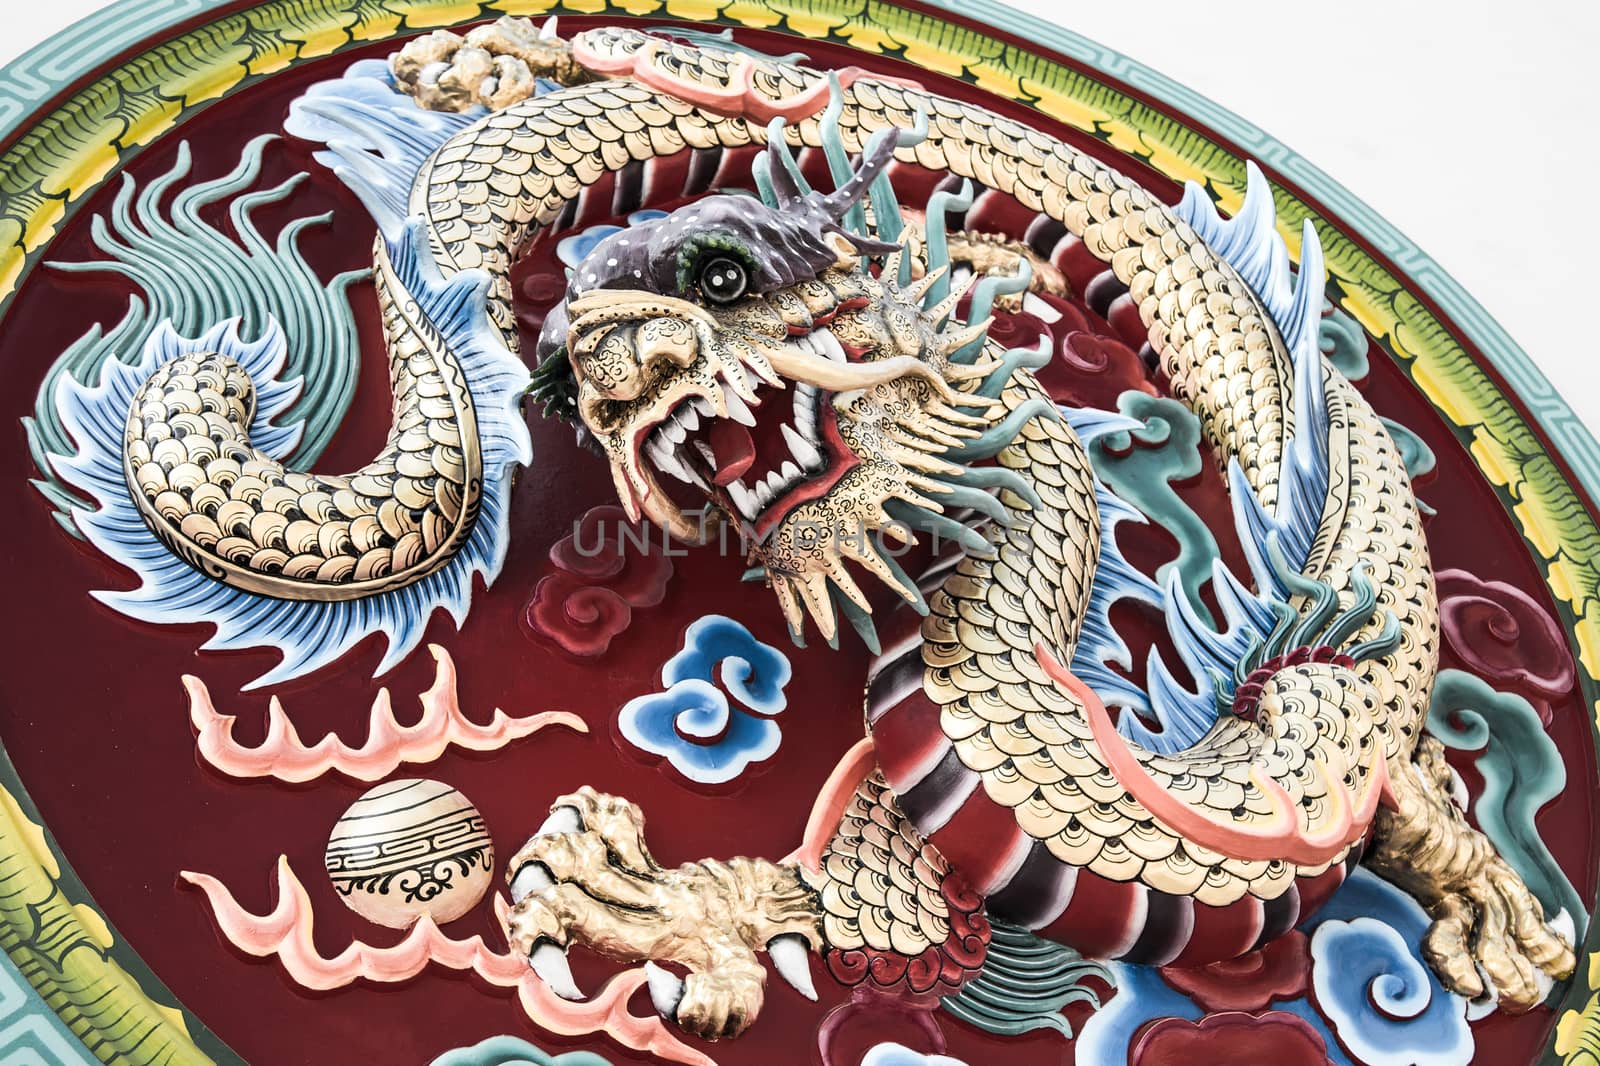 Dragon stucco reliefs in Chinese style by pixbox77